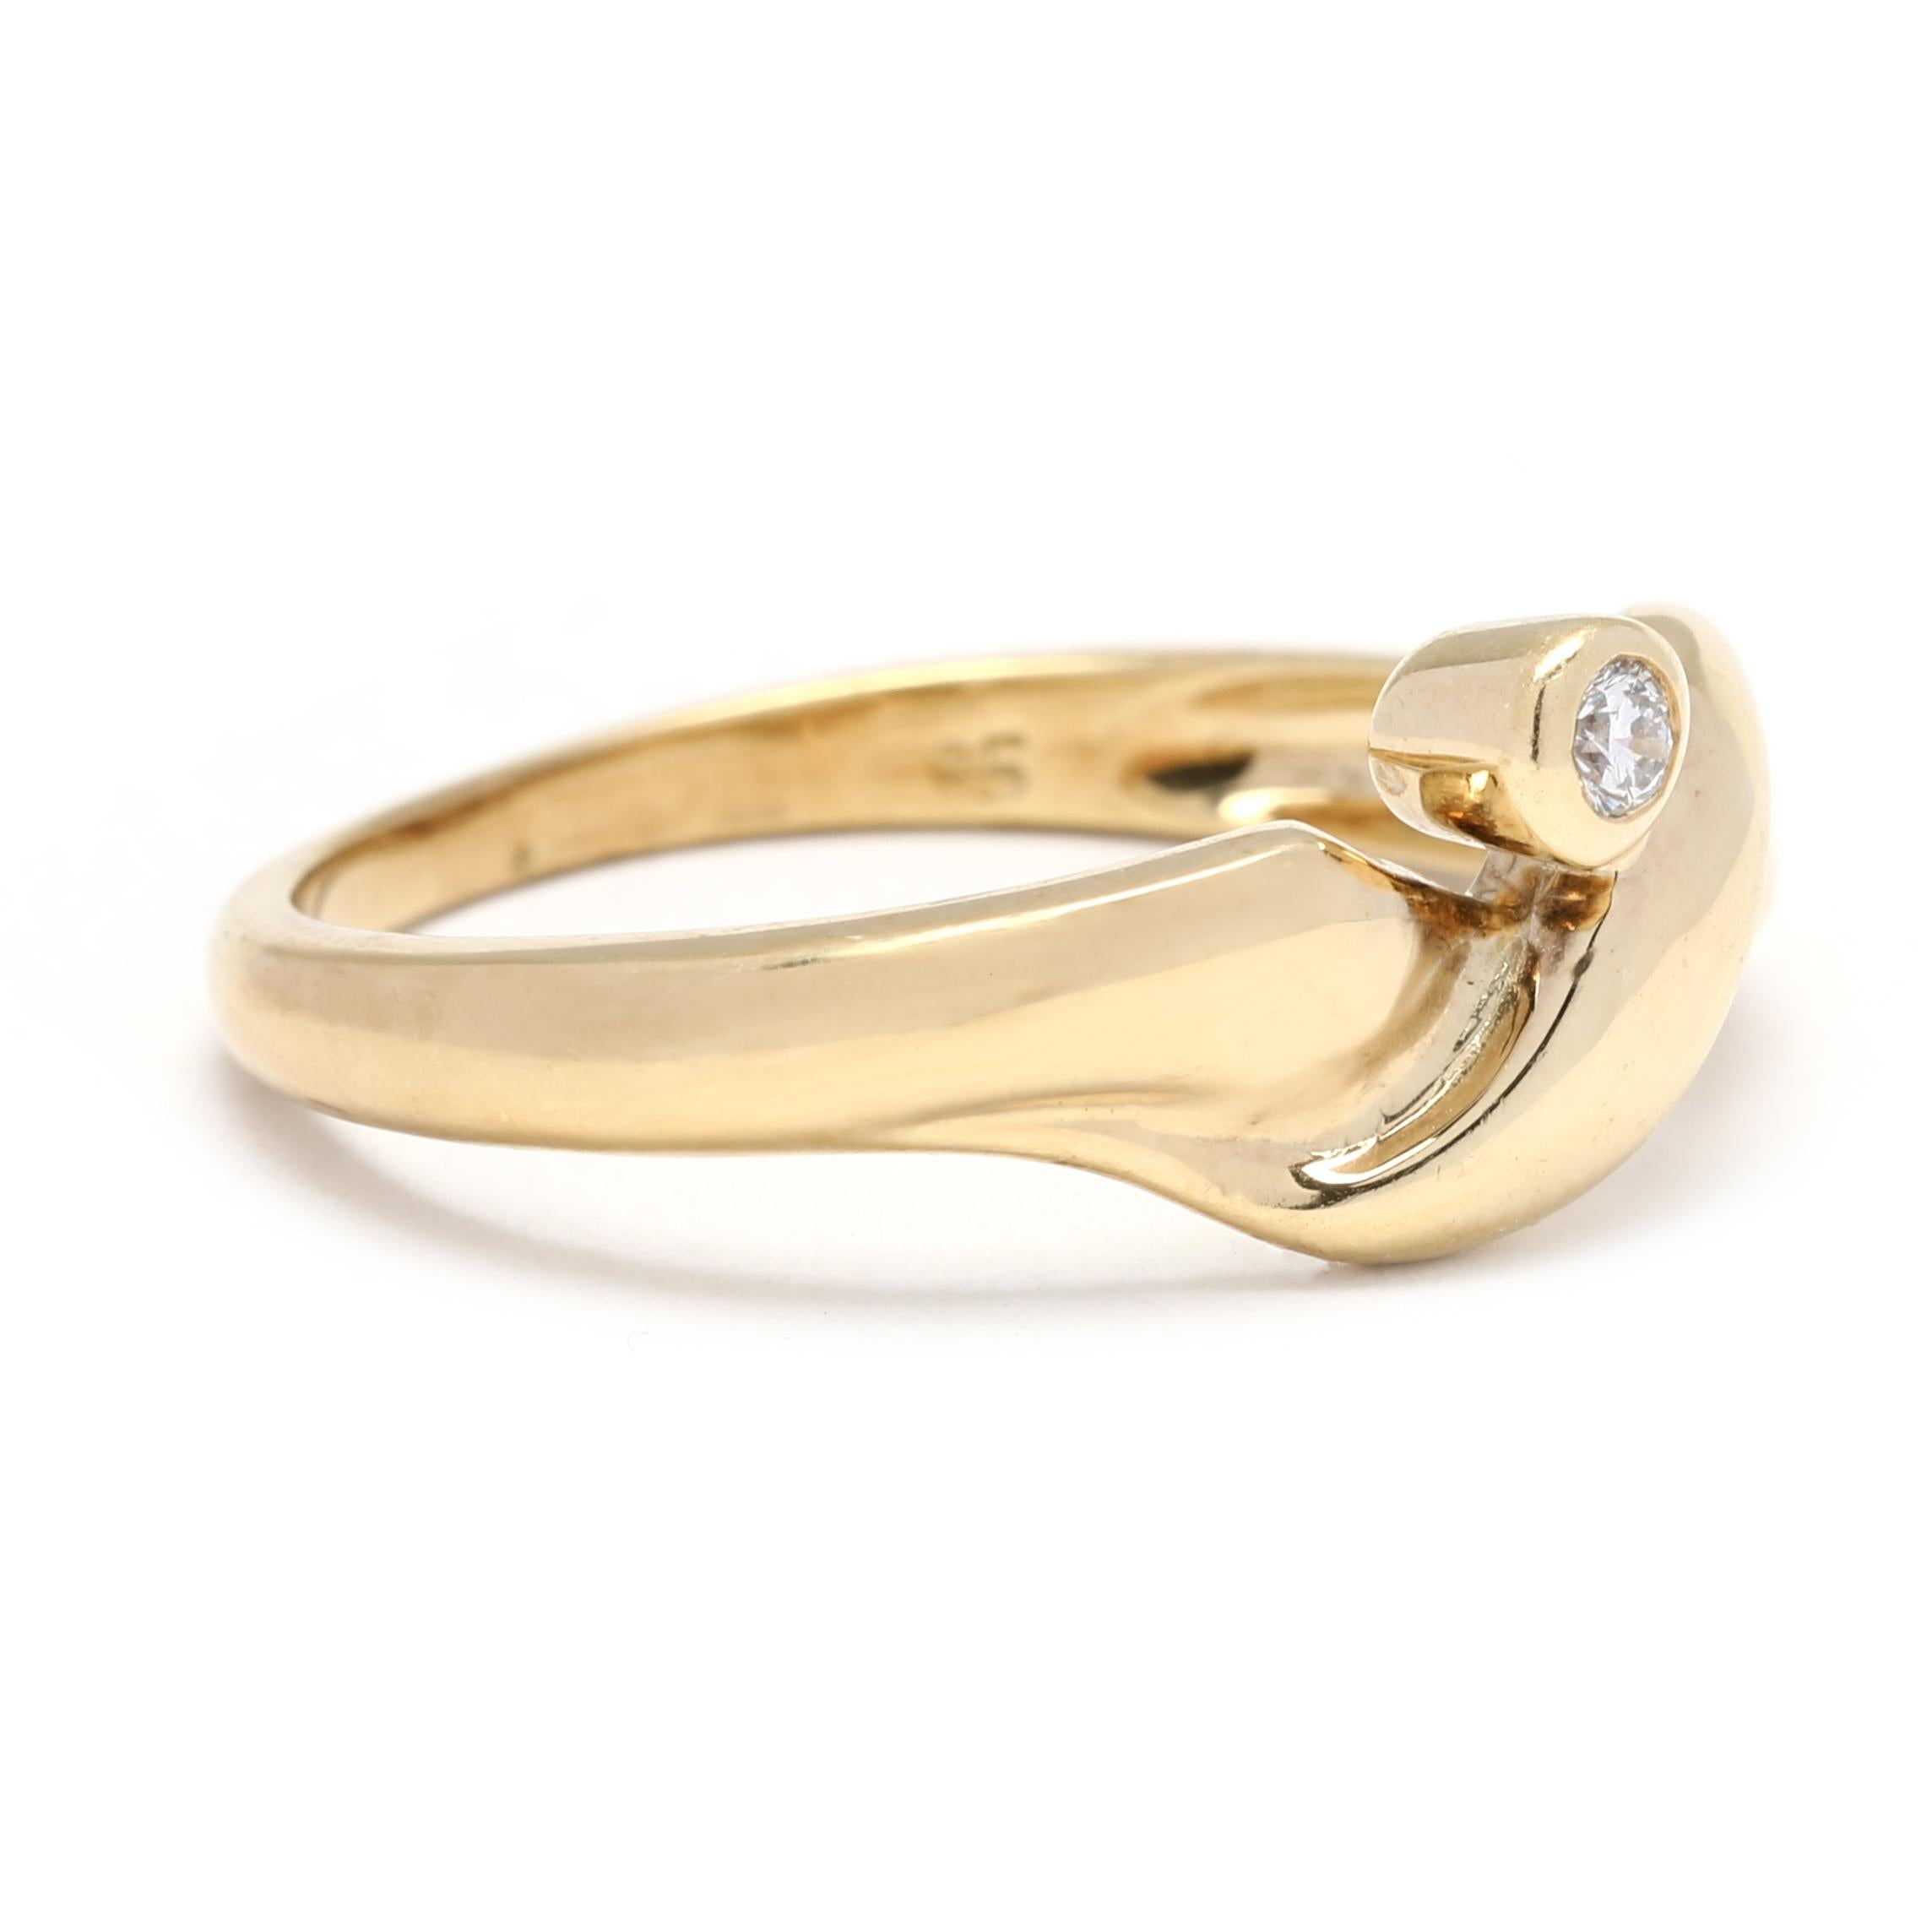 This gorgeous 14K yellow gold diamond crossover band is a beautiful and delicate addition to any jewelry collection. Featuring 0.03 carats of diamonds in a unique crossover design, this delicate and stackable diamond band adds sophistication and